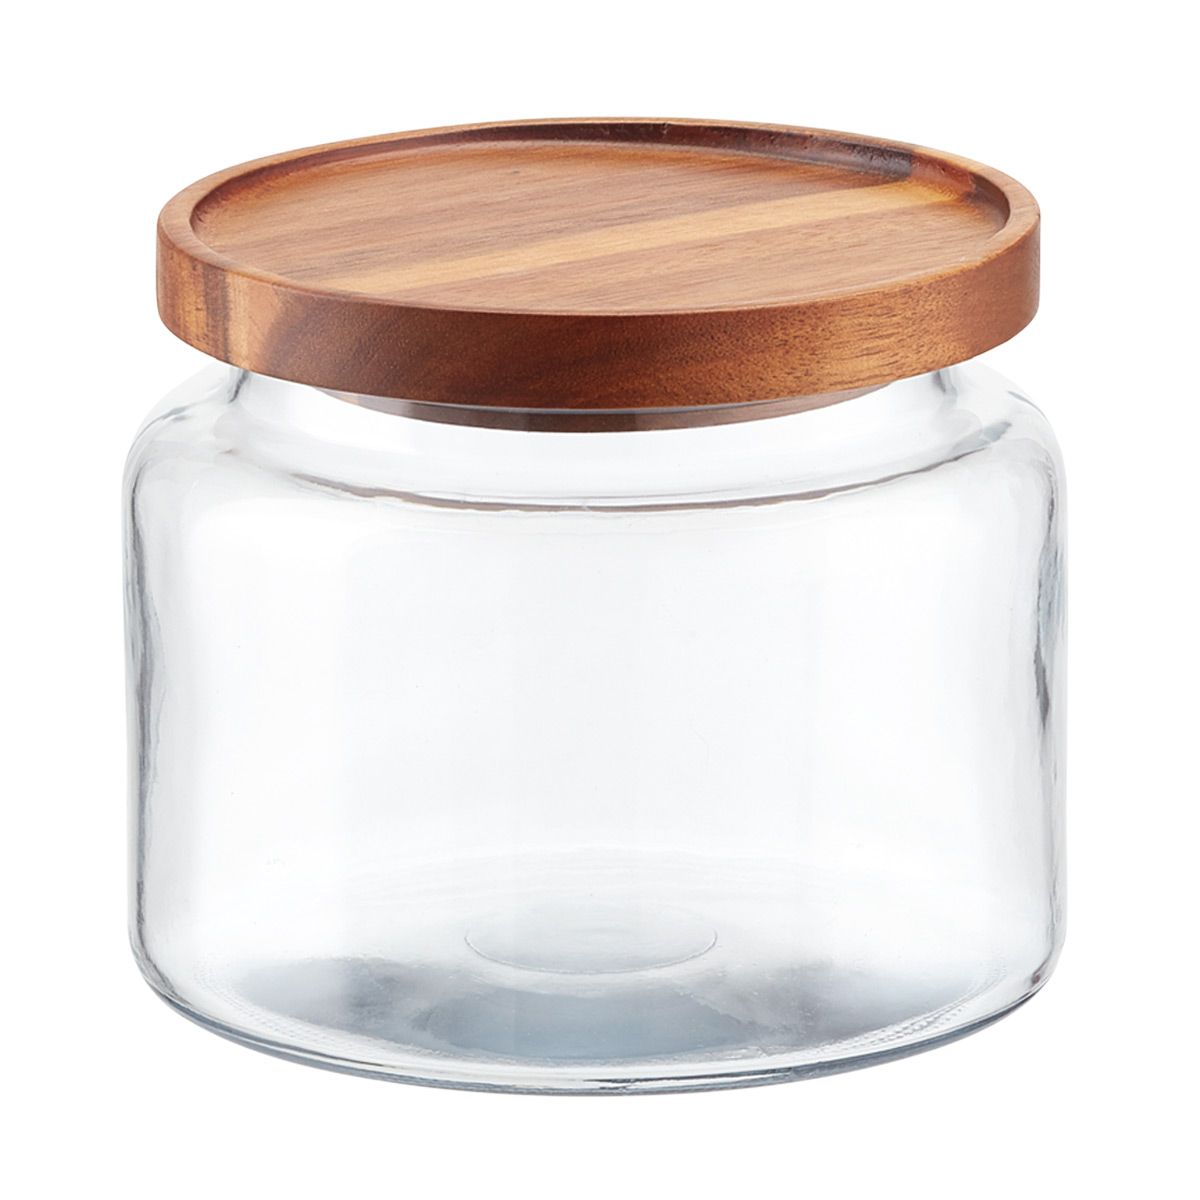 Montana Jar | The Container Store